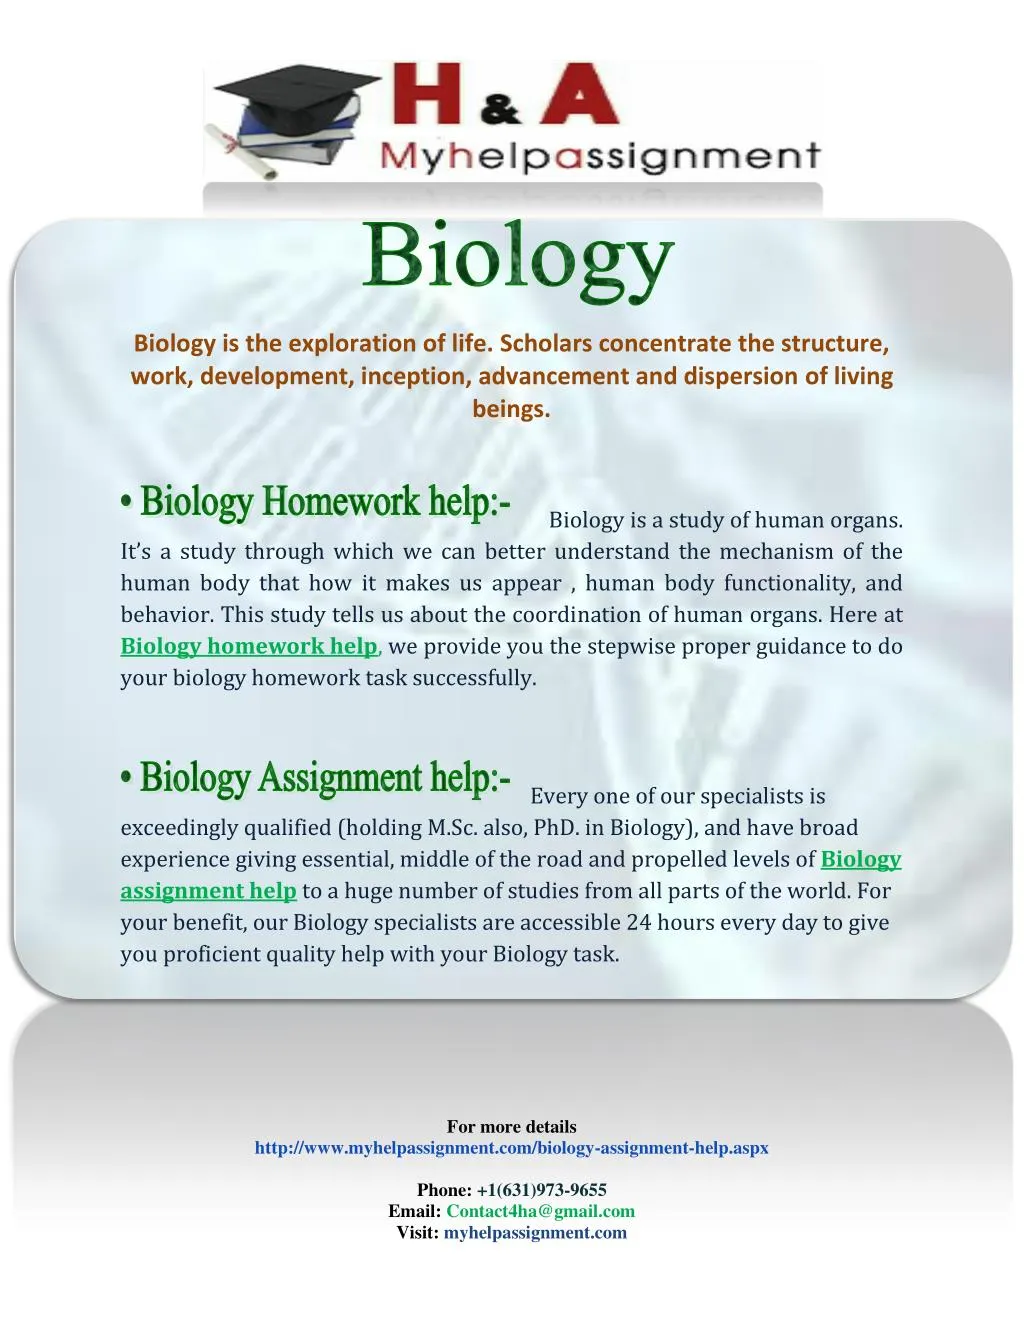 biology is the exploration of life scholars